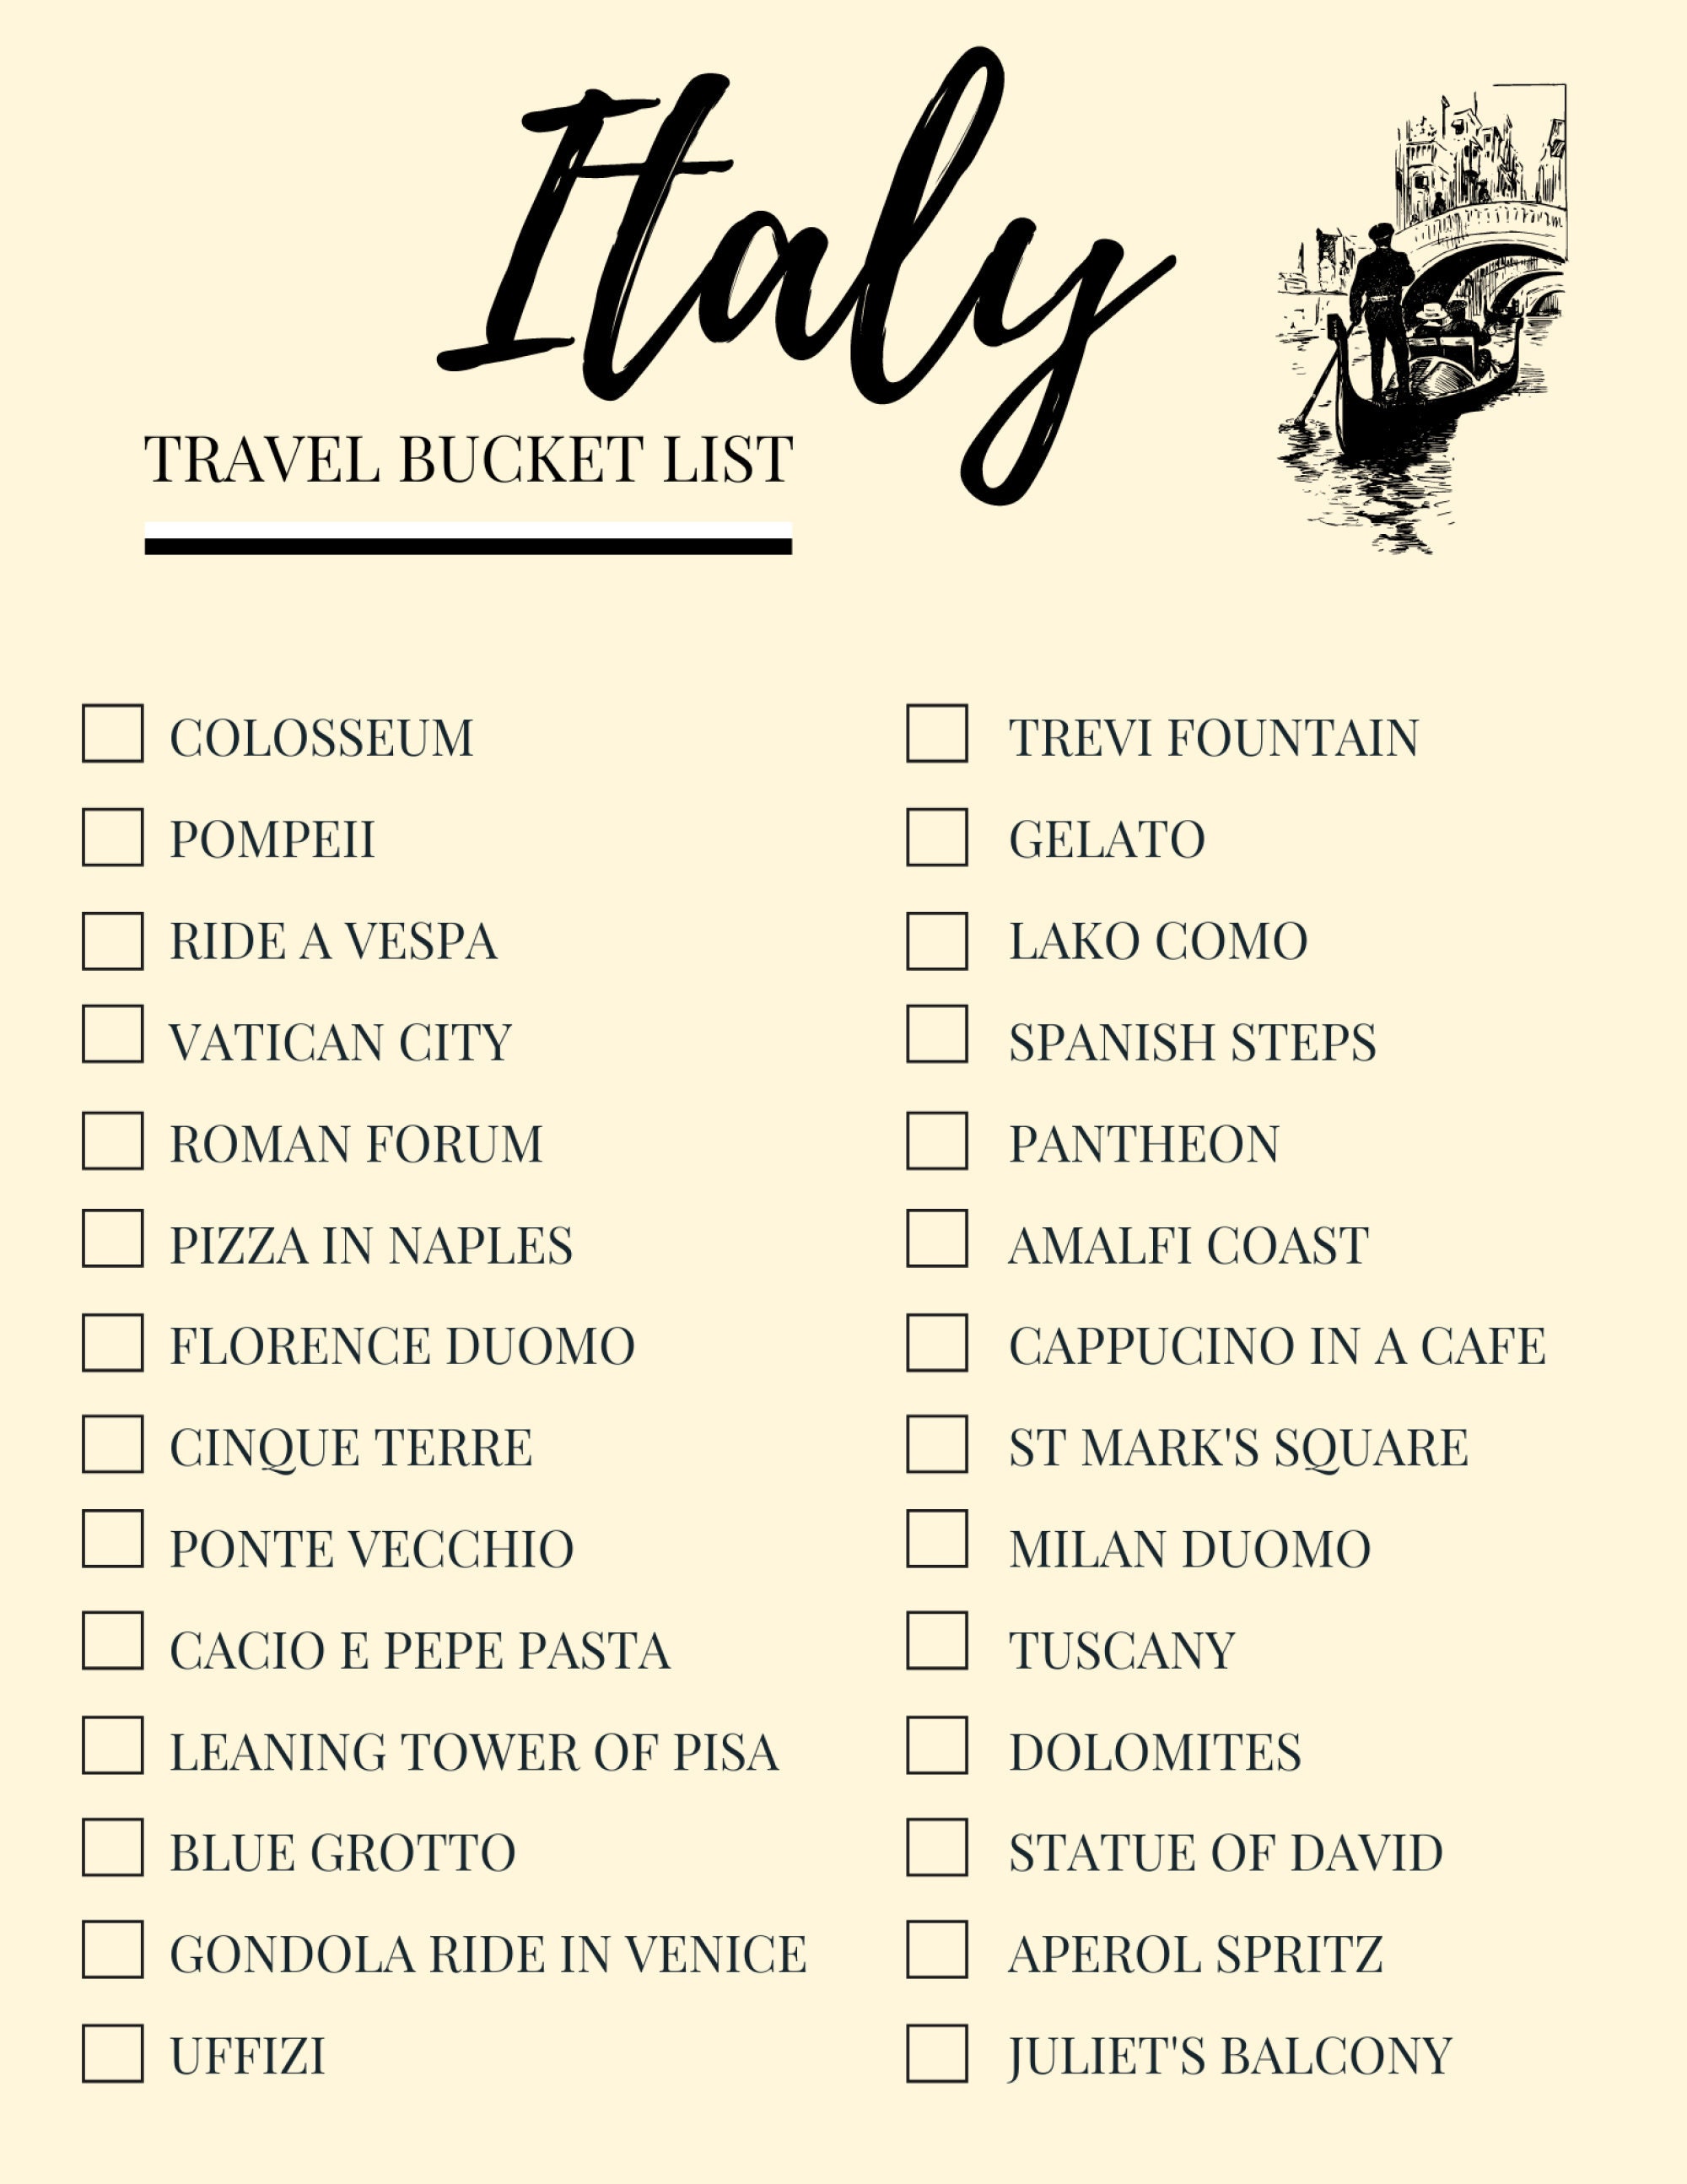 travel requirements to italy